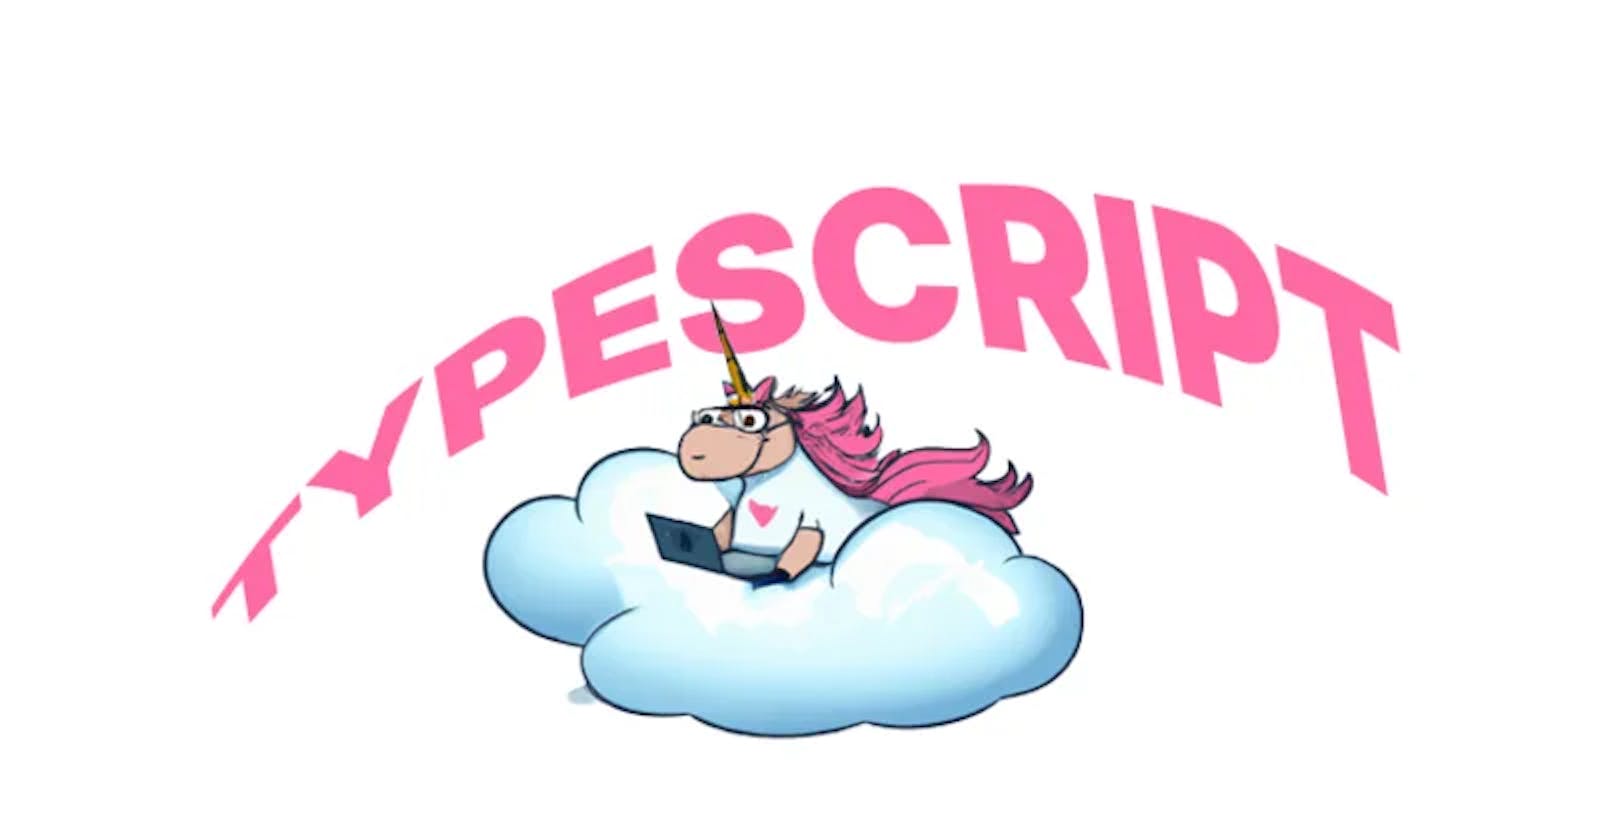 Why I'm Learning Typescript